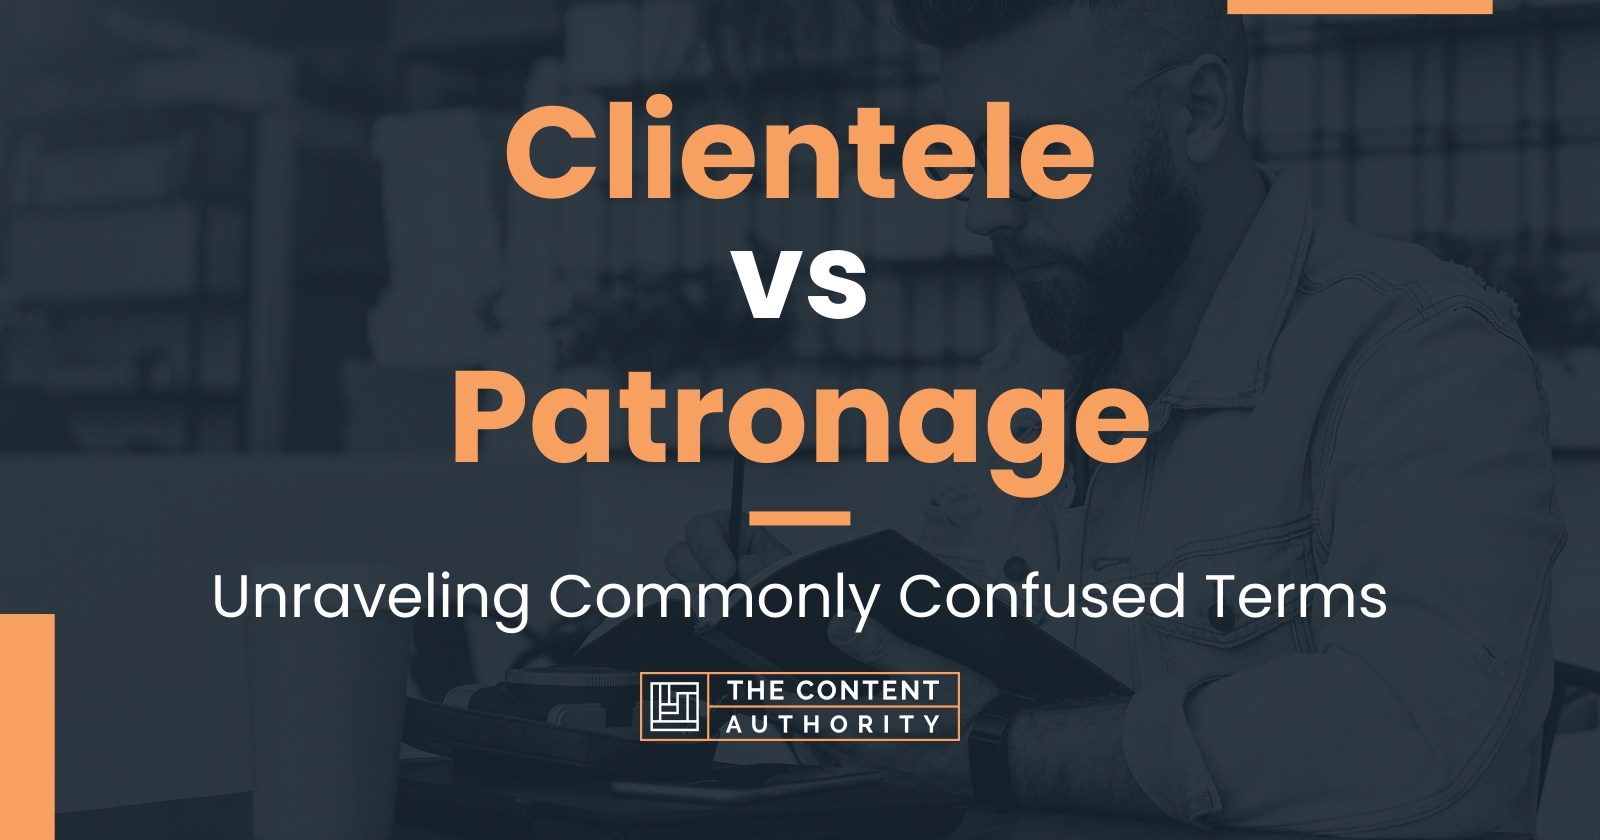 Clientele vs Patronage: Unraveling Commonly Confused Terms